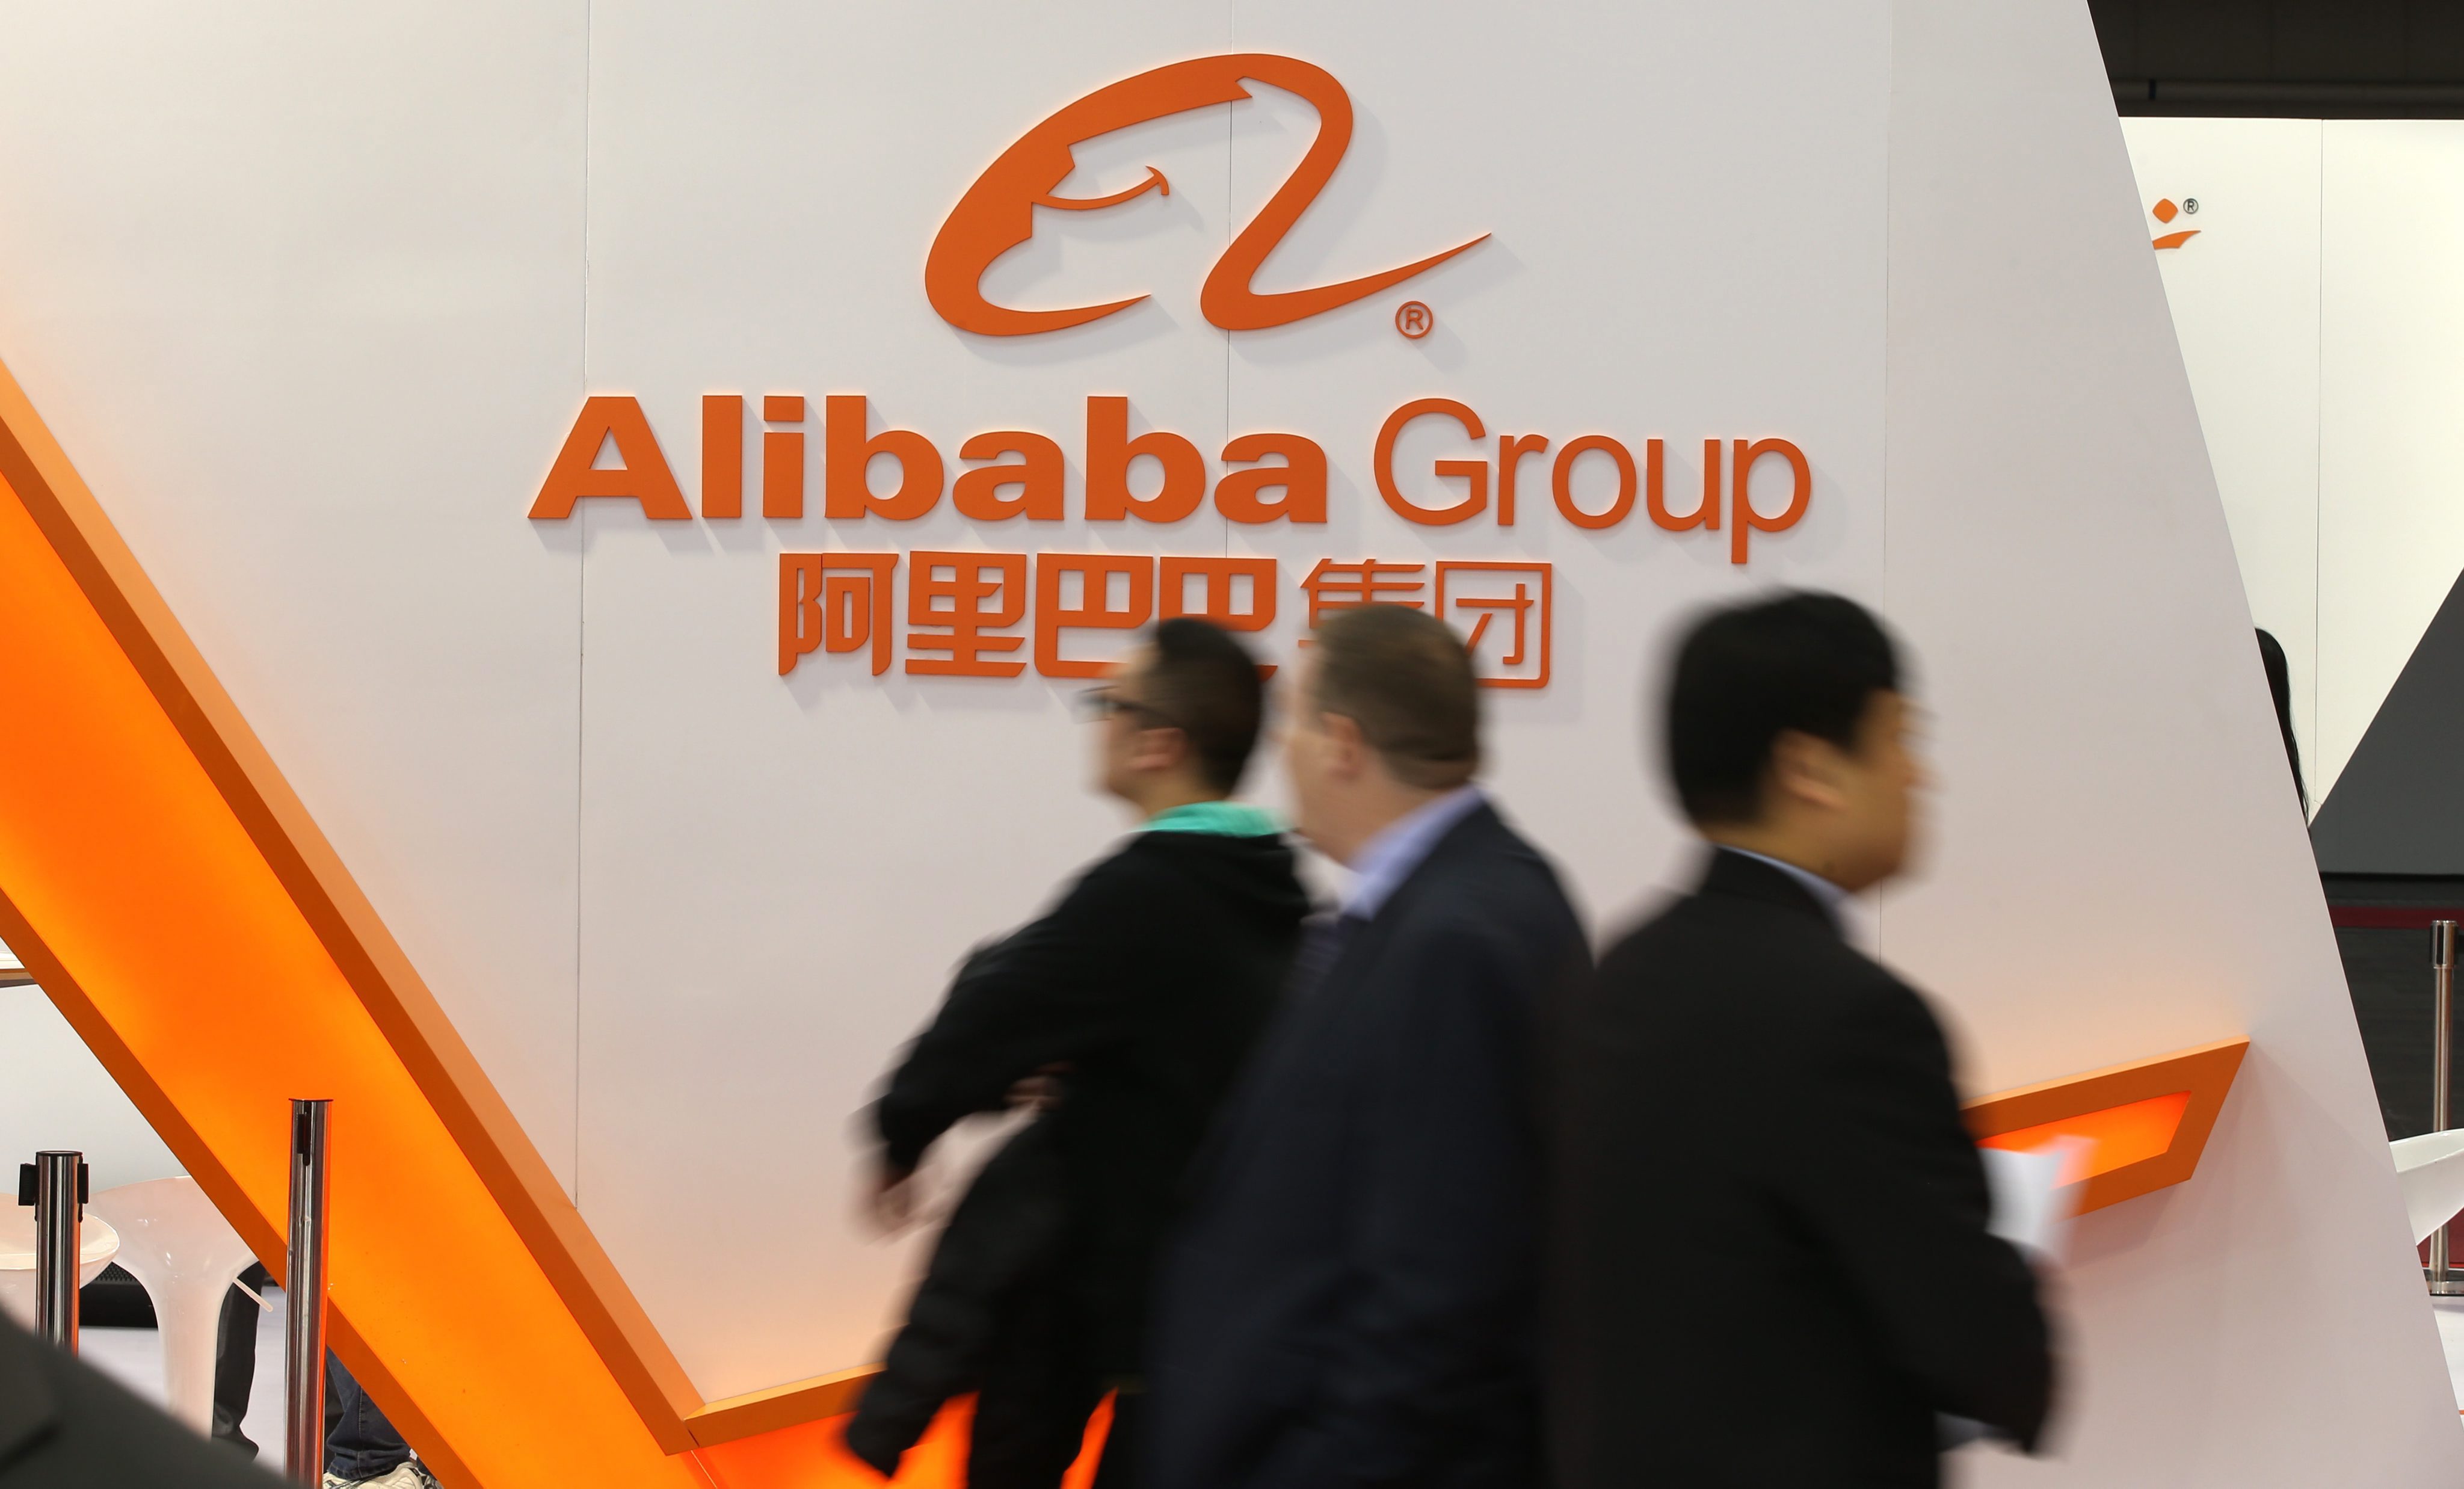 Alibaba cloud computing arm to help foreign tech firms enter China